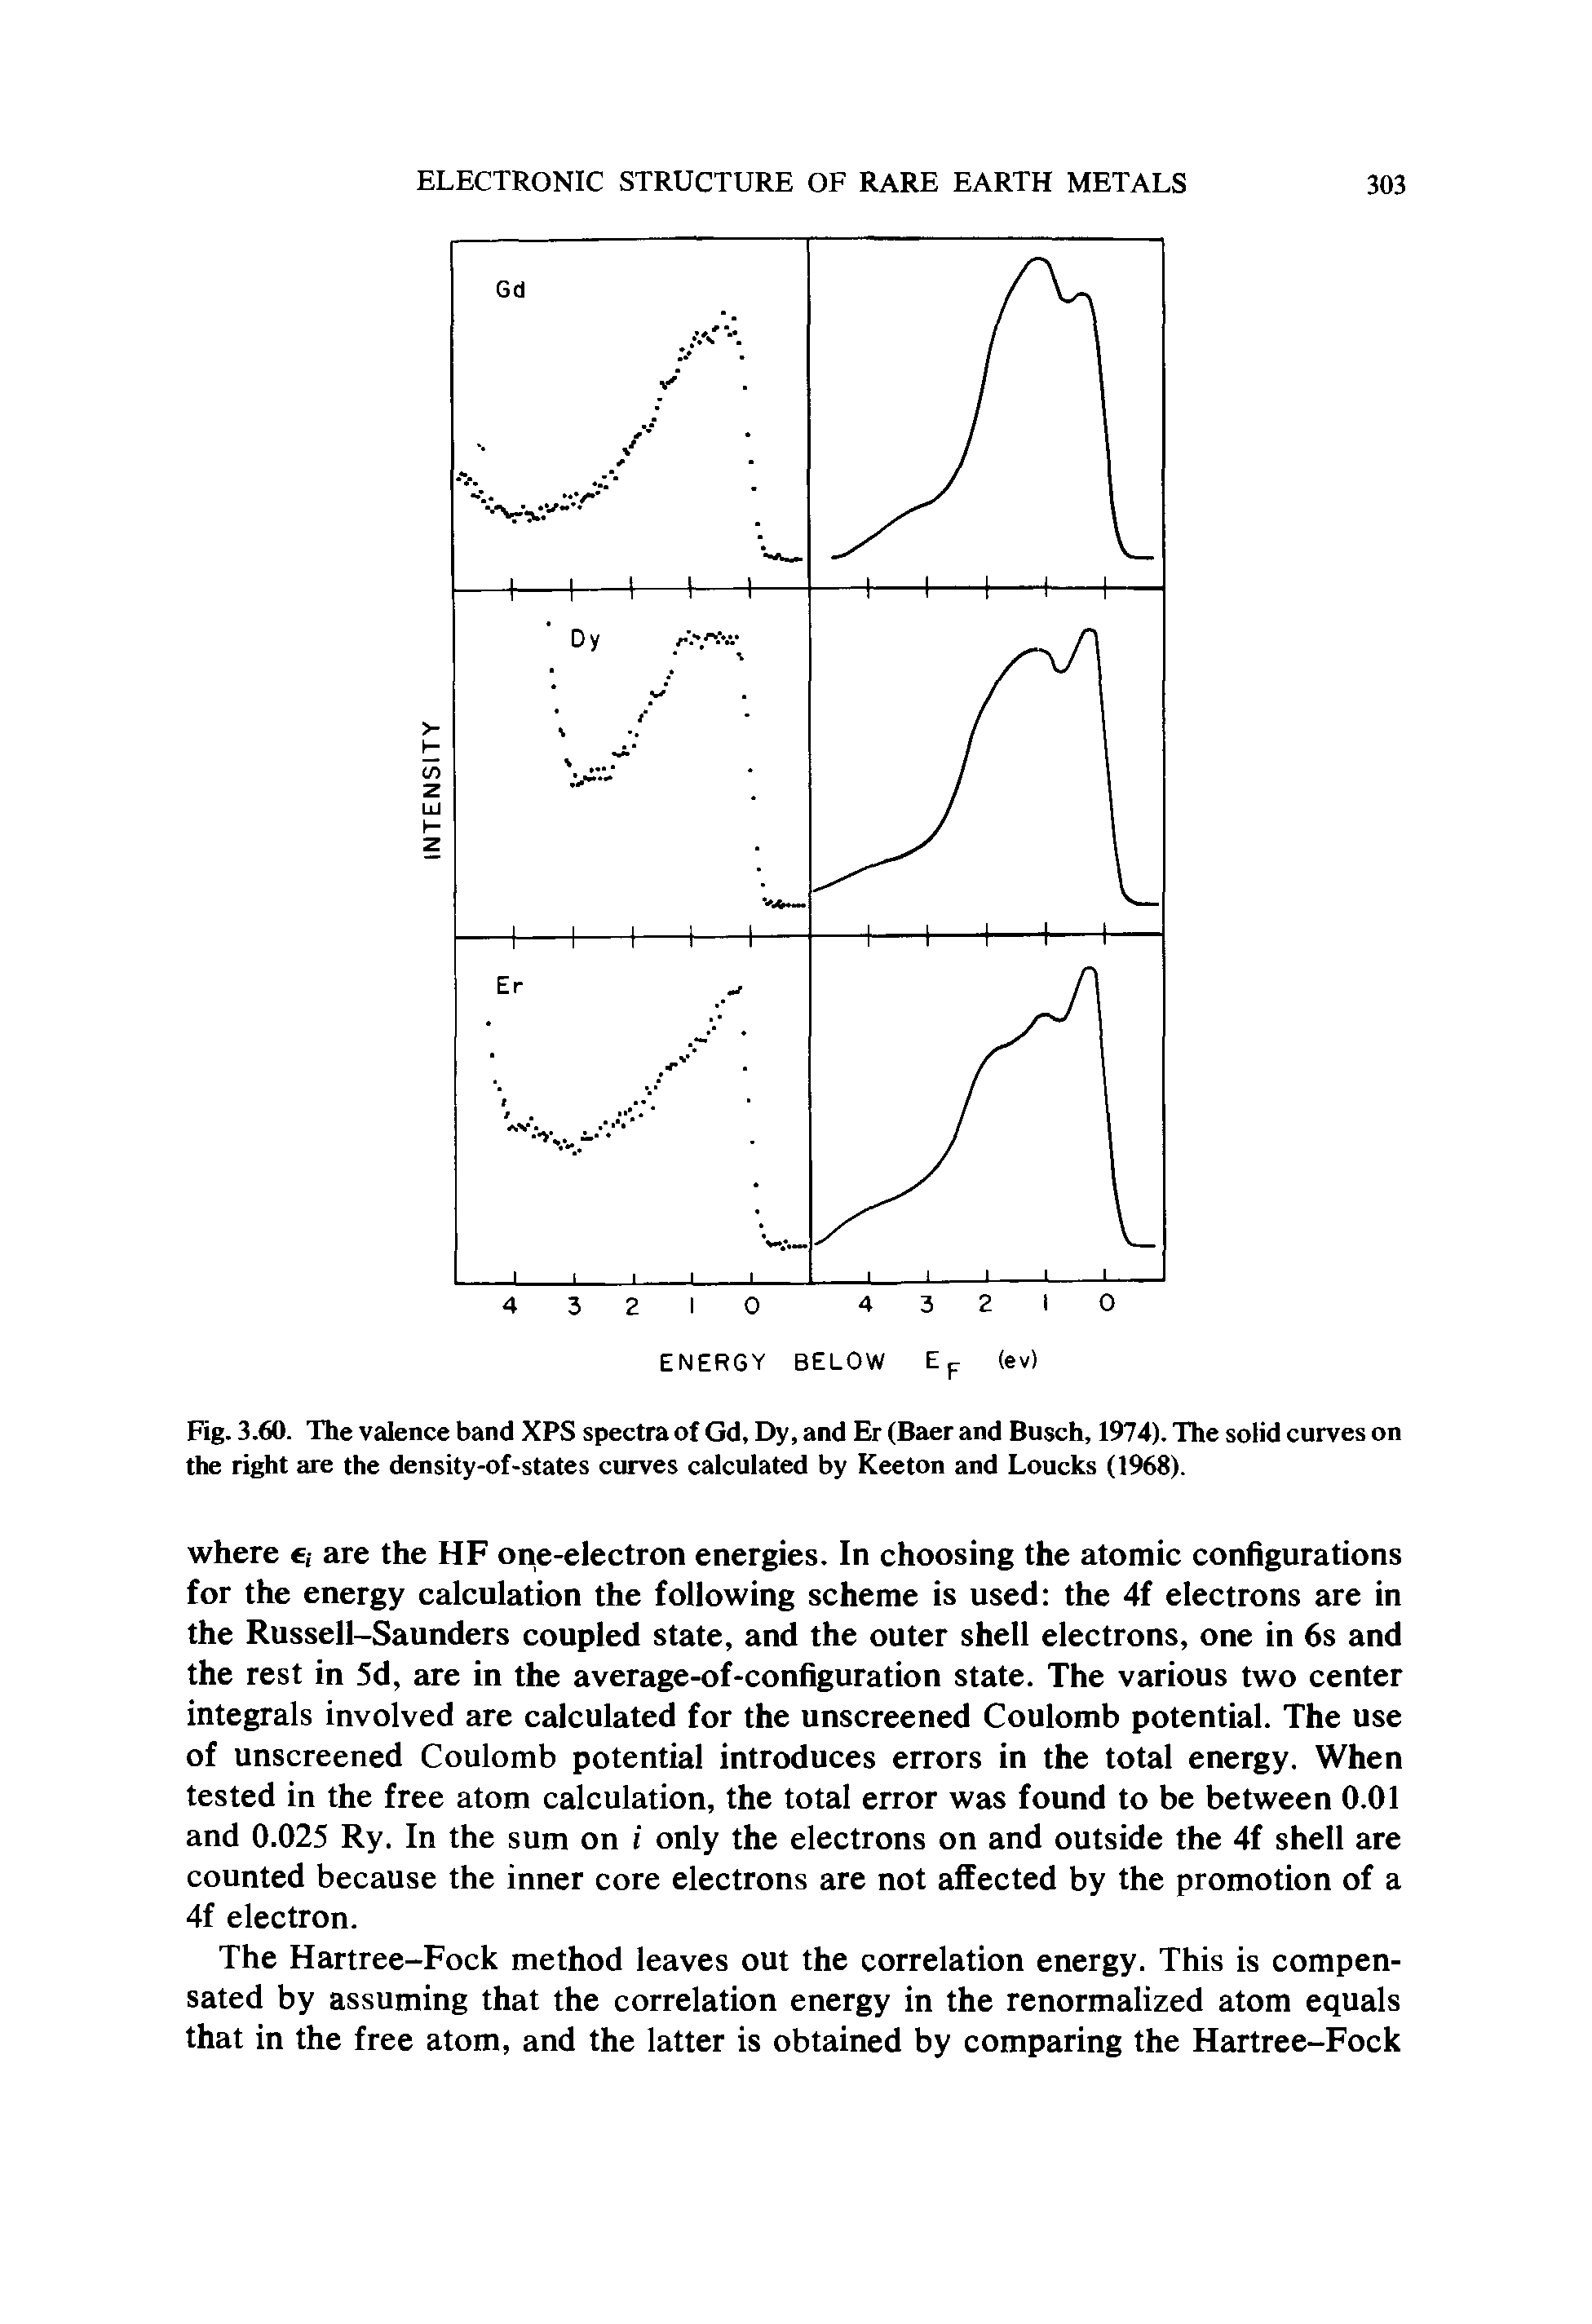 Fig. 3.60. The valence band XPS spectra of Gd, Dy, and Er (Baer and Busch, 1974). The solid curves on the right are the density-of-states curves calculated by Keeton and Loucks (1968).